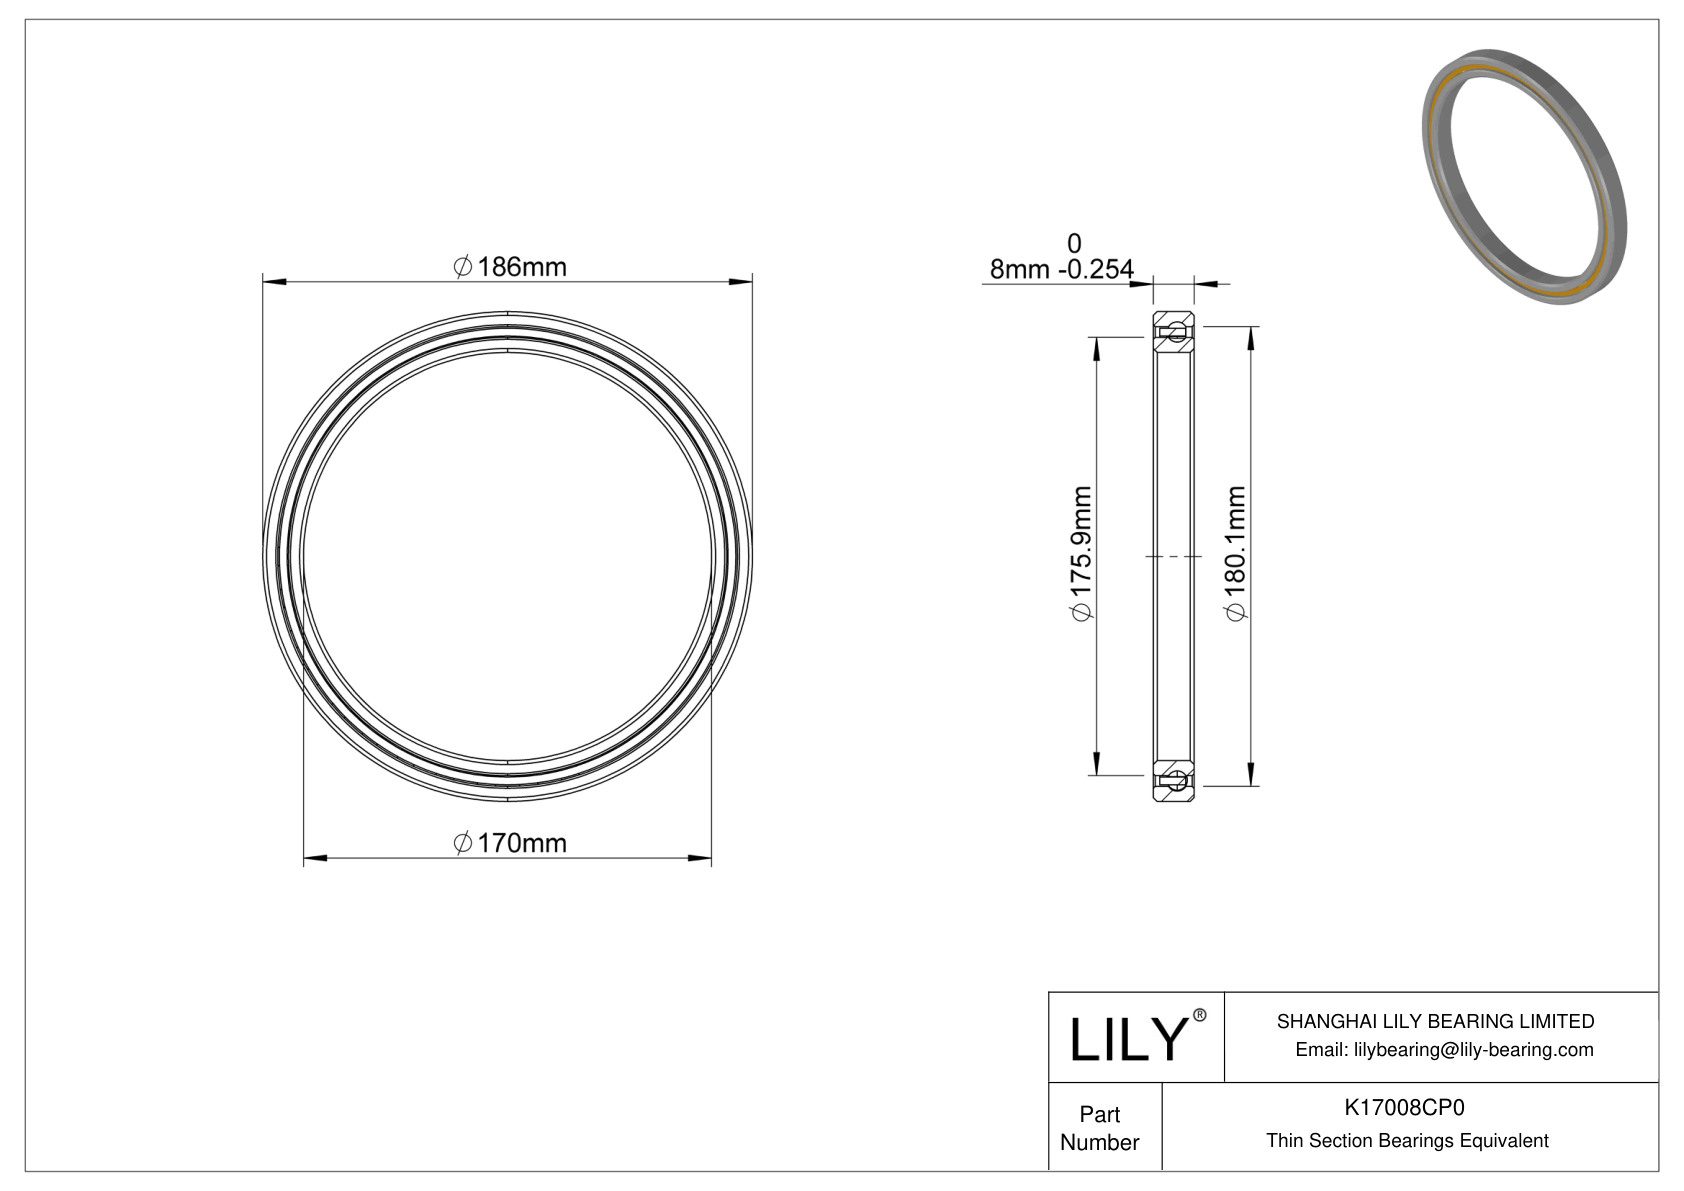 K17008CP0 Constant Section (CS) Bearings cad drawing